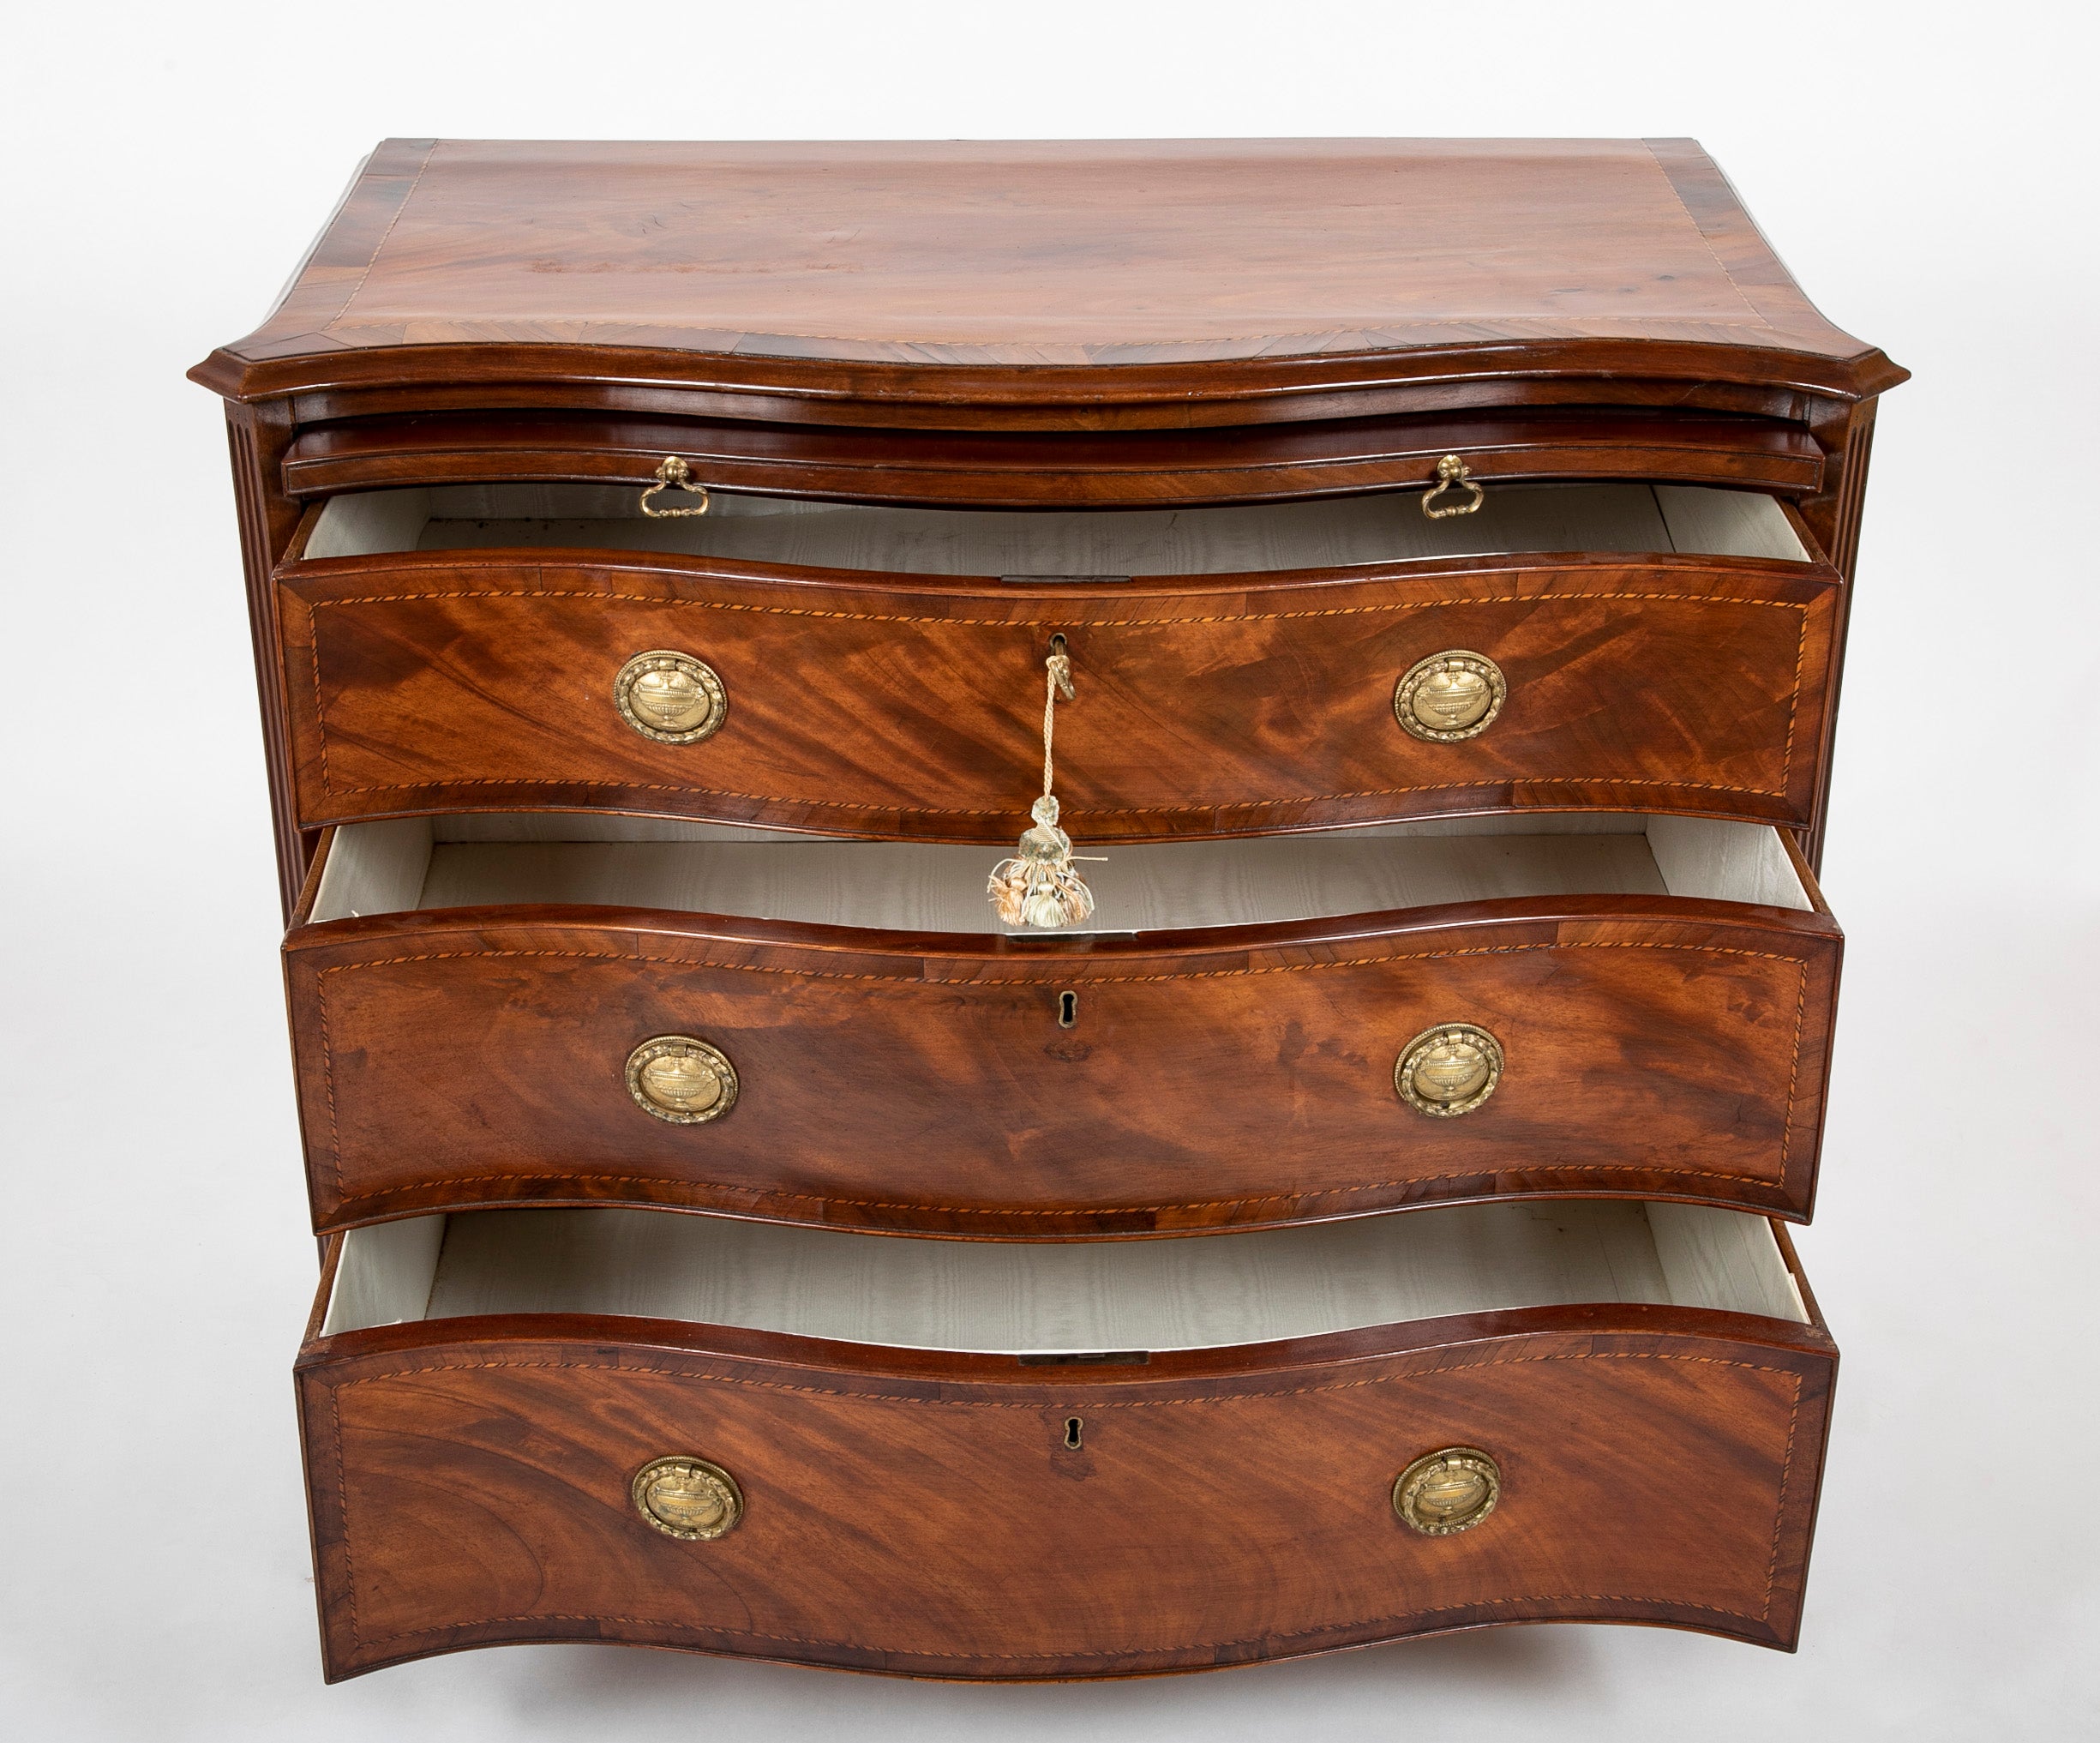 English Late Regency Carved Mahogany Chest of Drawers